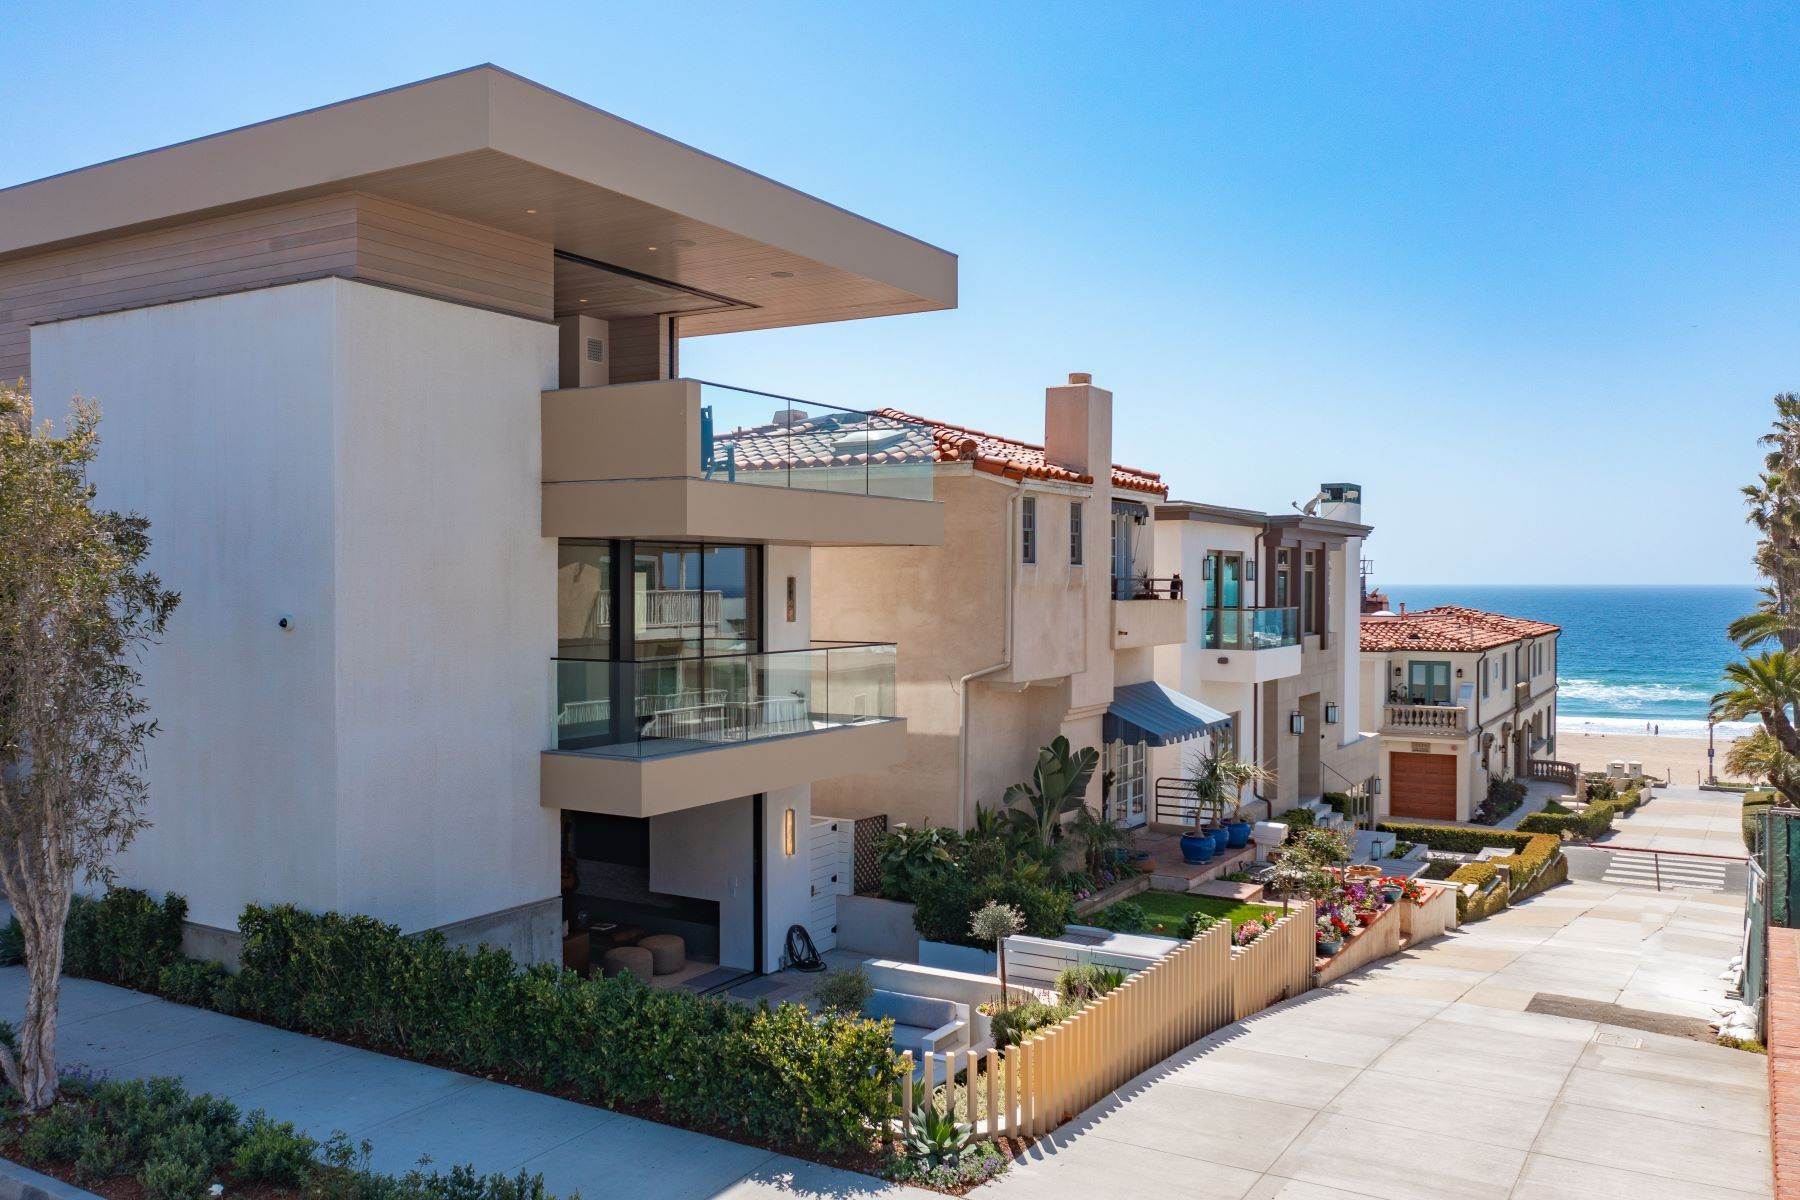 Single Family Homes for Sale at 2415 Manhattan Avenue, Manhattan Beach, CA 90266 2415 Manhattan Avenue Manhattan Beach, California 90266 United States